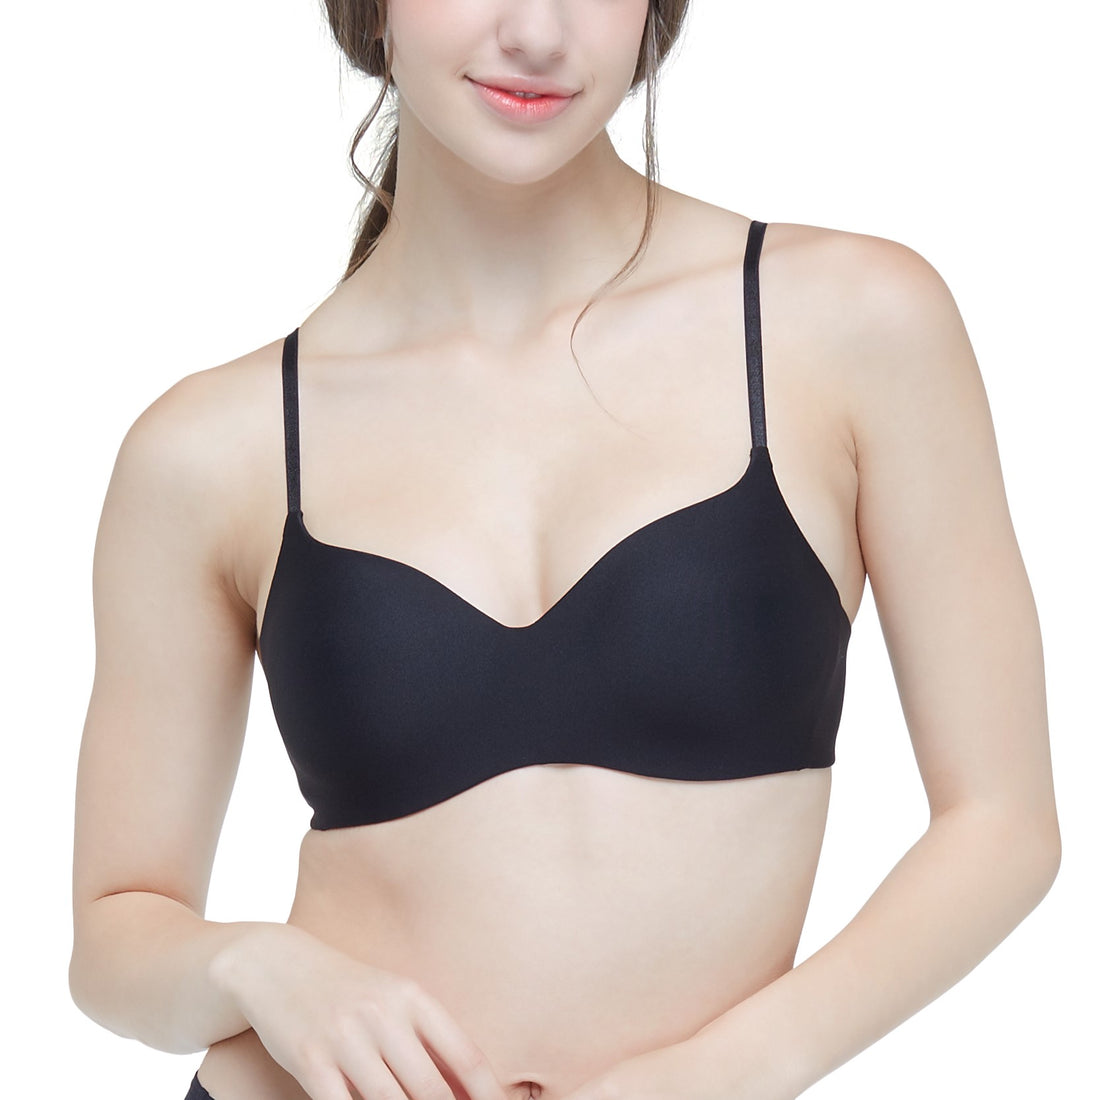 Thailand Wacoal bra counter purchase no steel ring no trace soft skin  comfortable underwear WB3A14 recommended